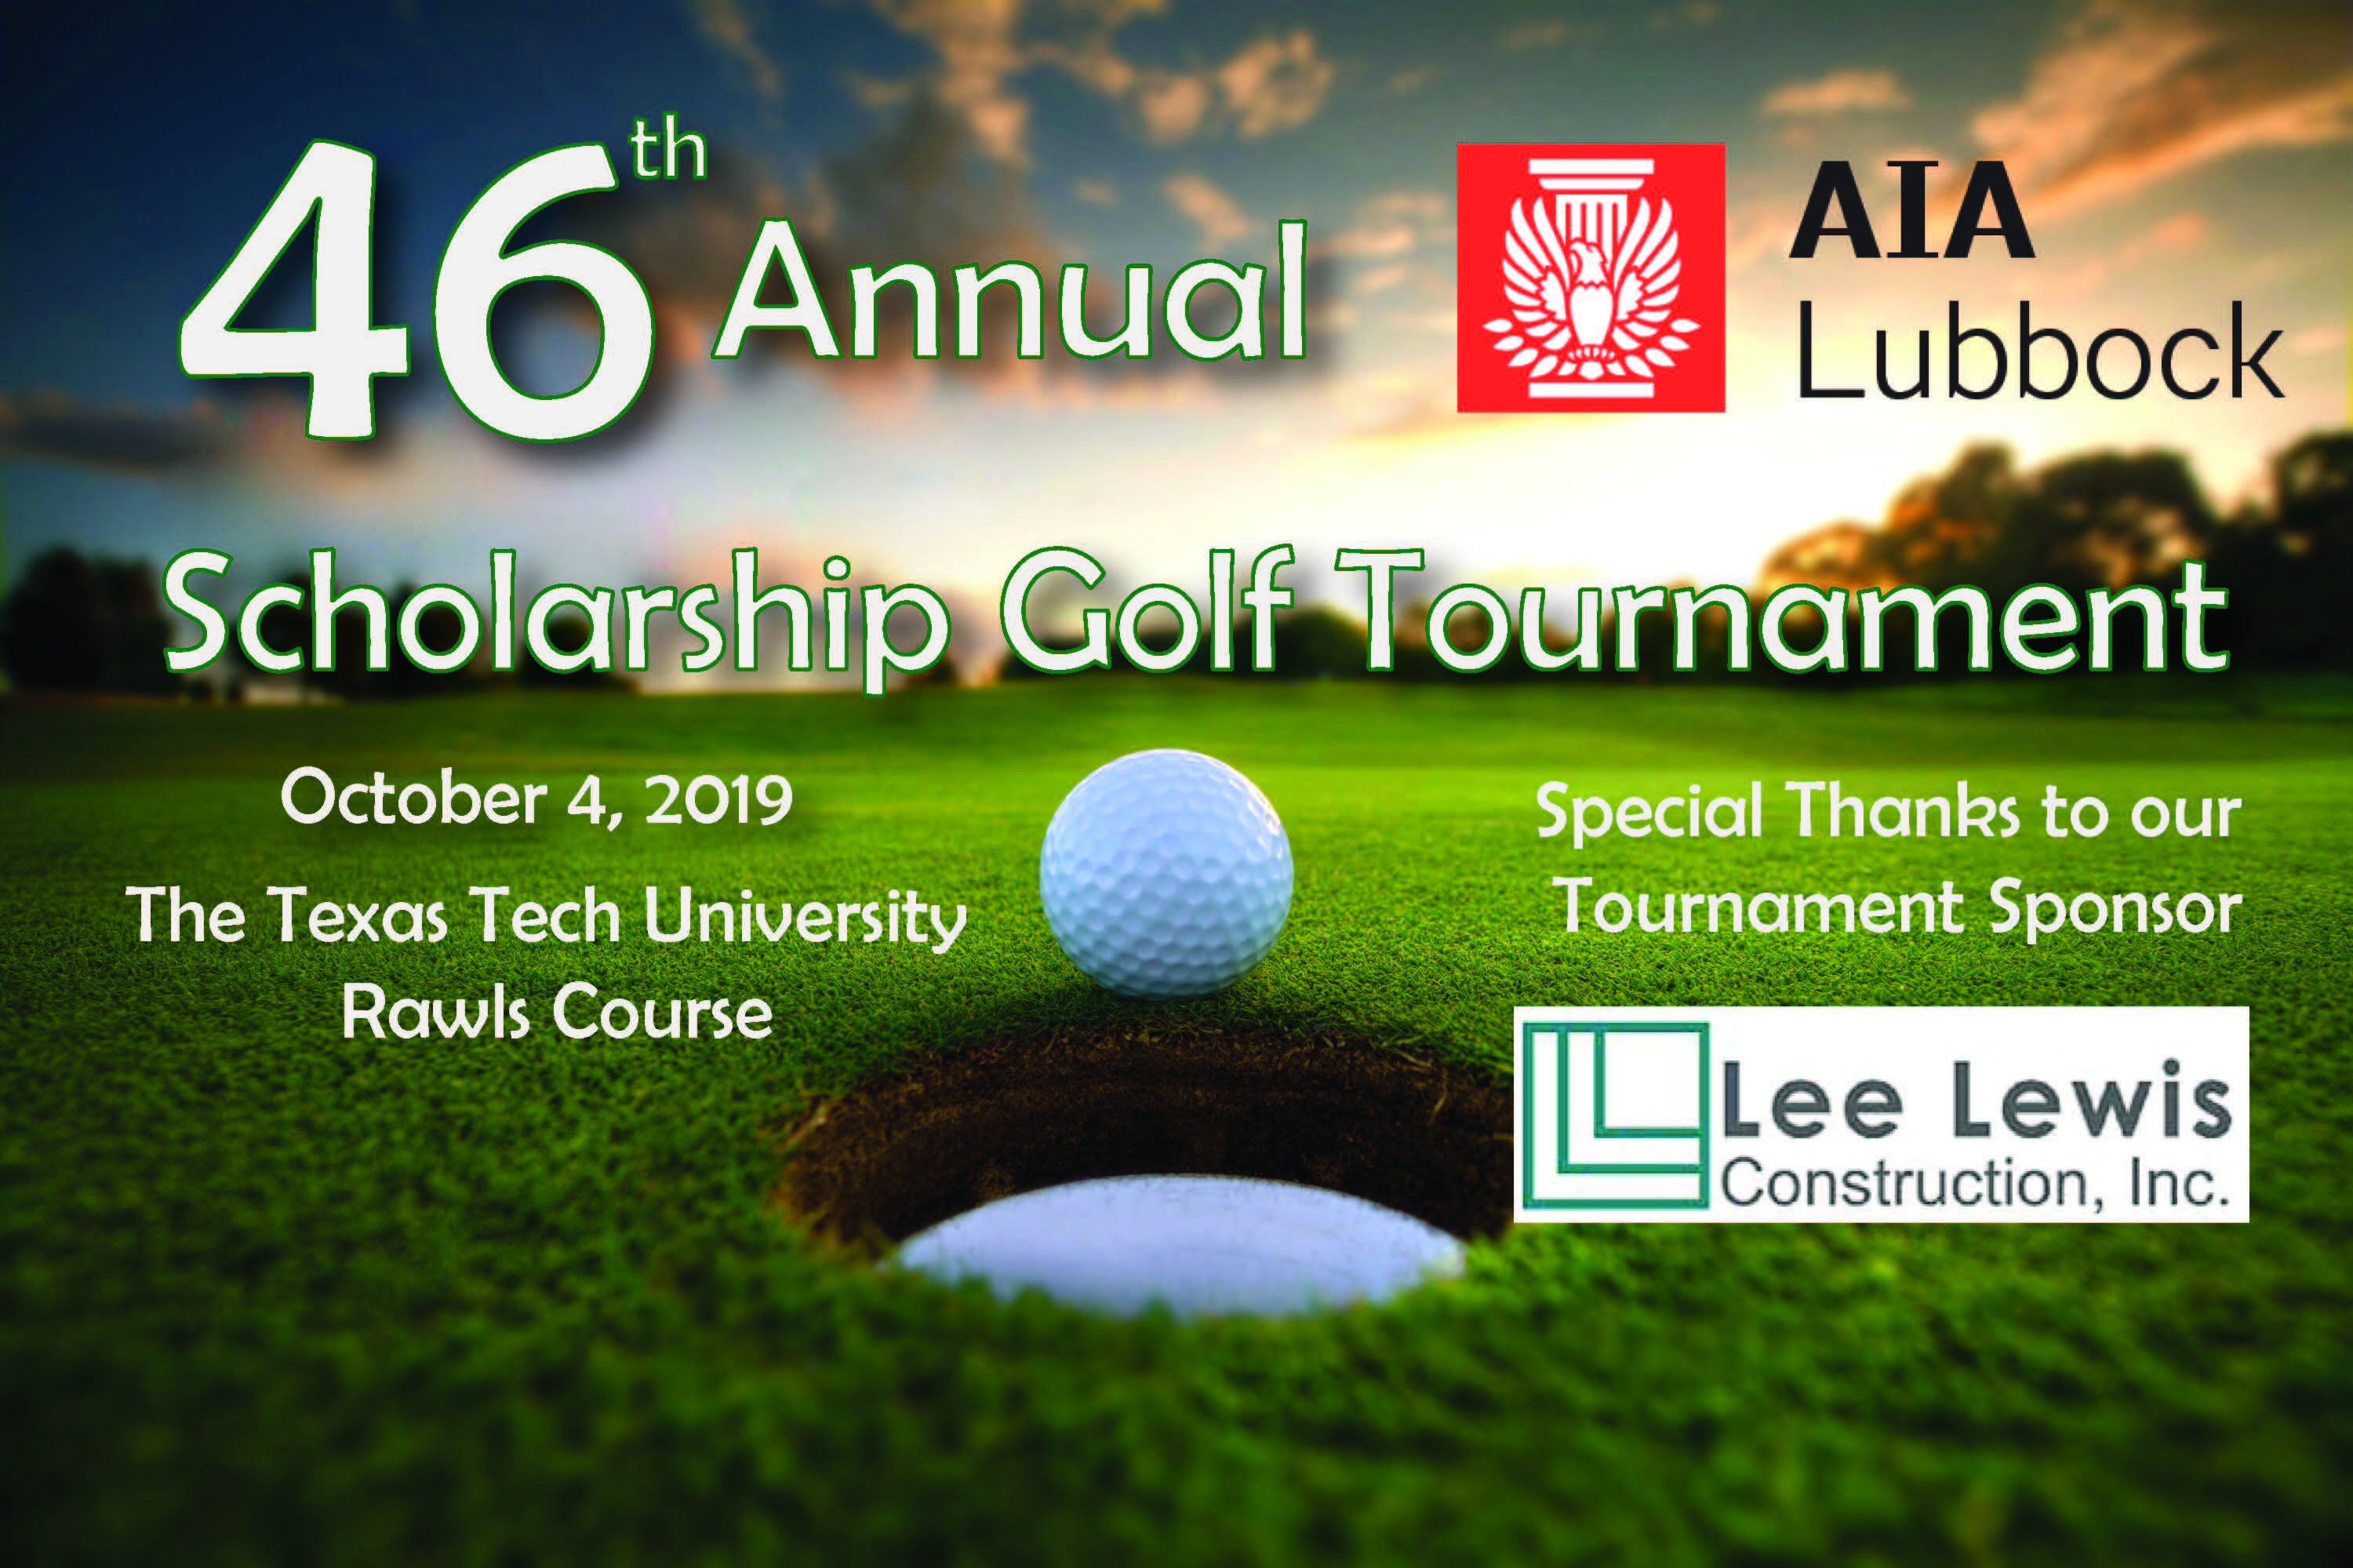 AIA Lubbock's 46th Annual Scholarship Golf Tournament